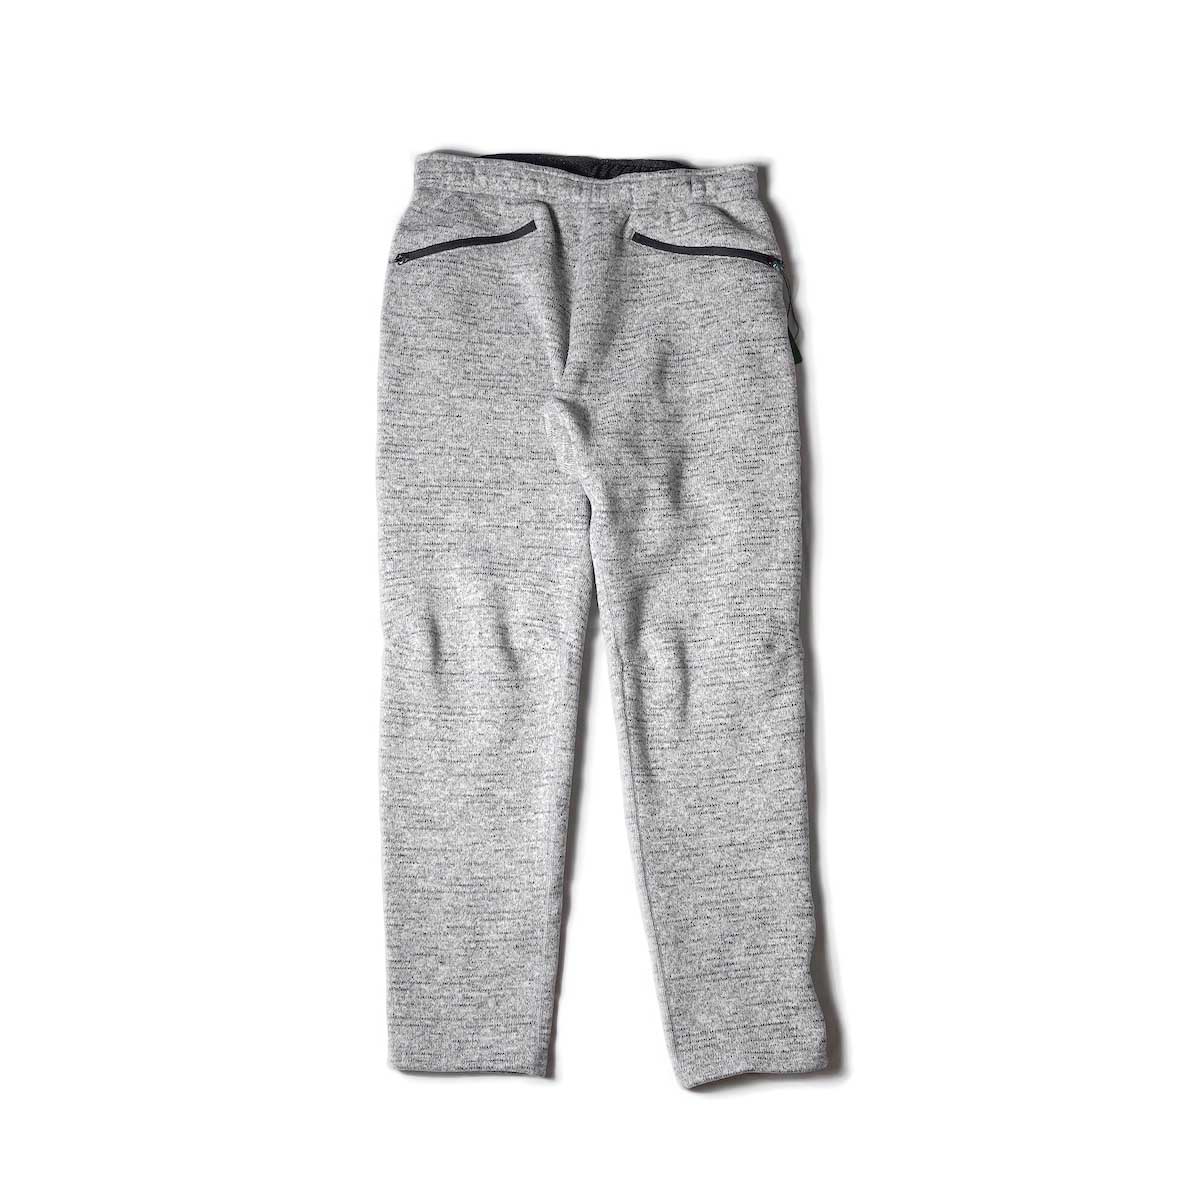 South2 West8 / 2P Cycle Pant - POLARTEC Fleece Lined Jersey (Grey)